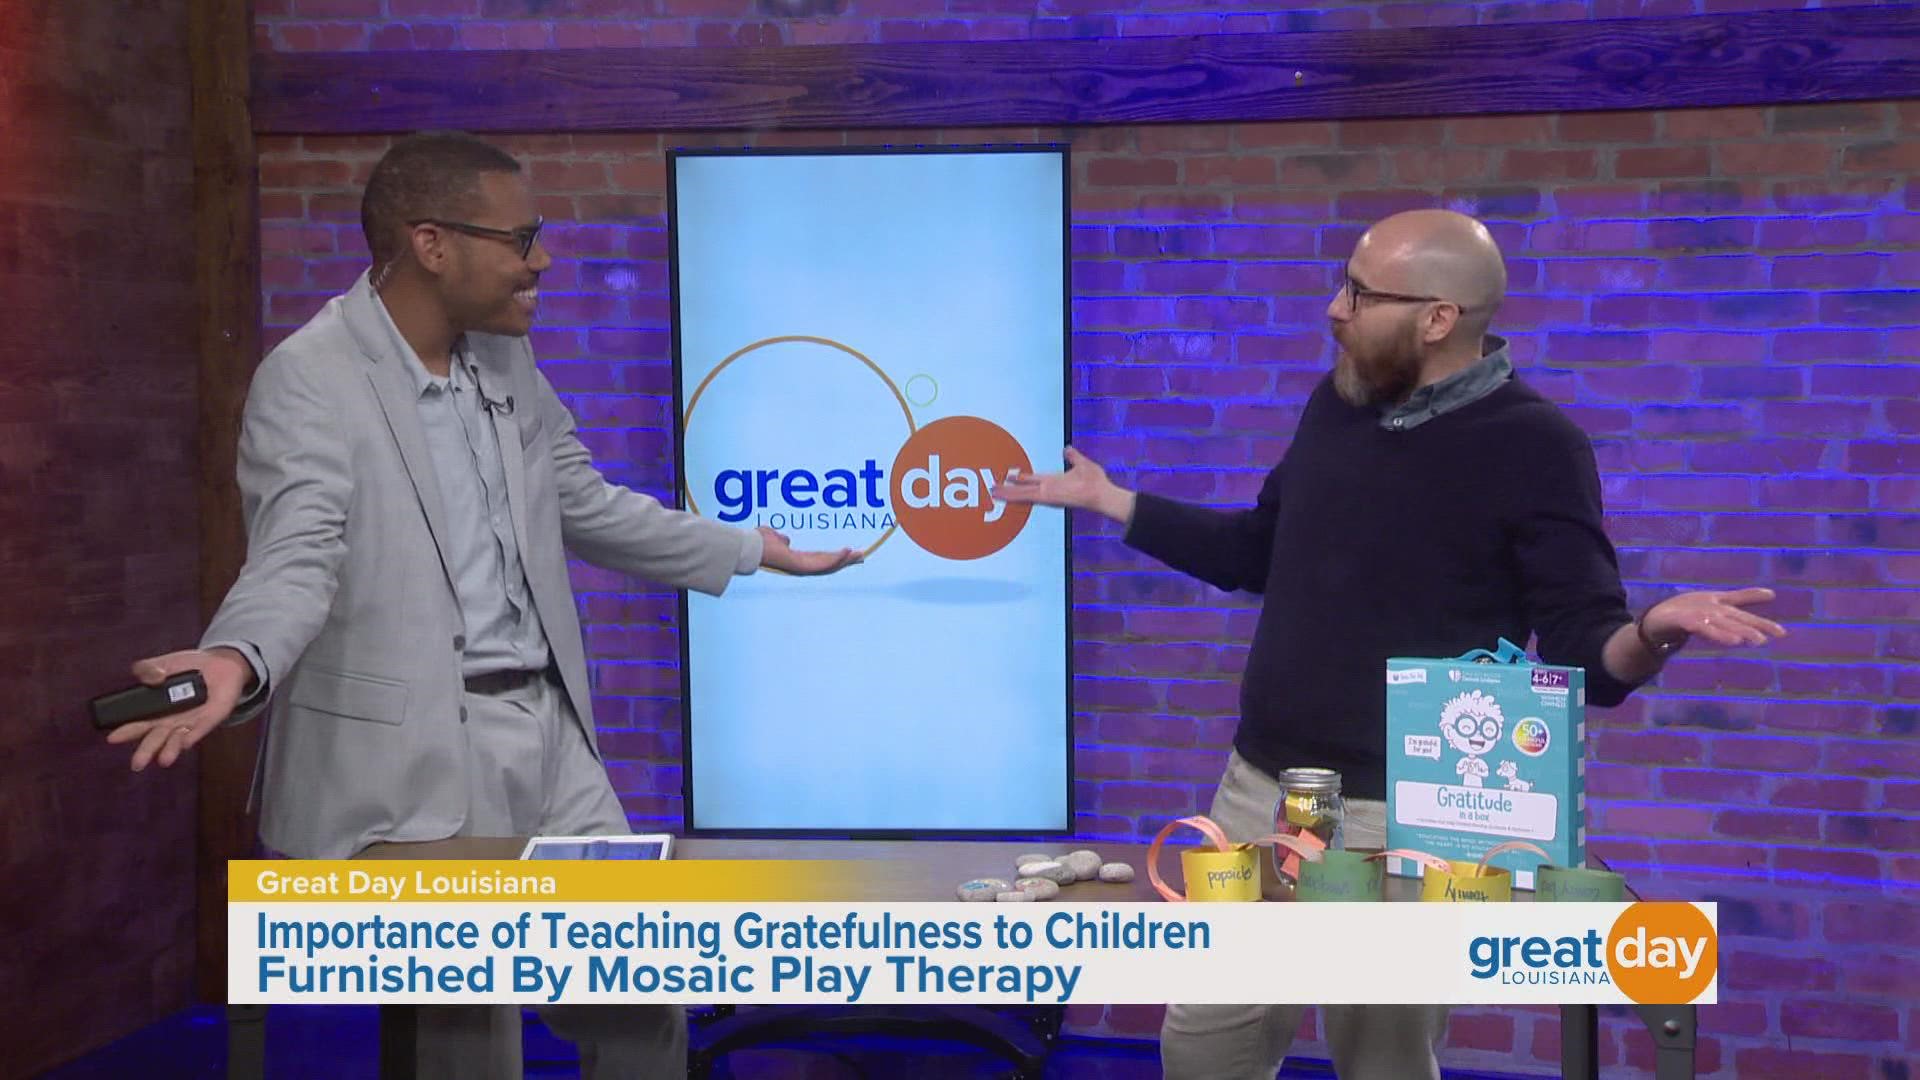 A licensed play therapist and counselor shared tips on how to teach gratefulness in children.